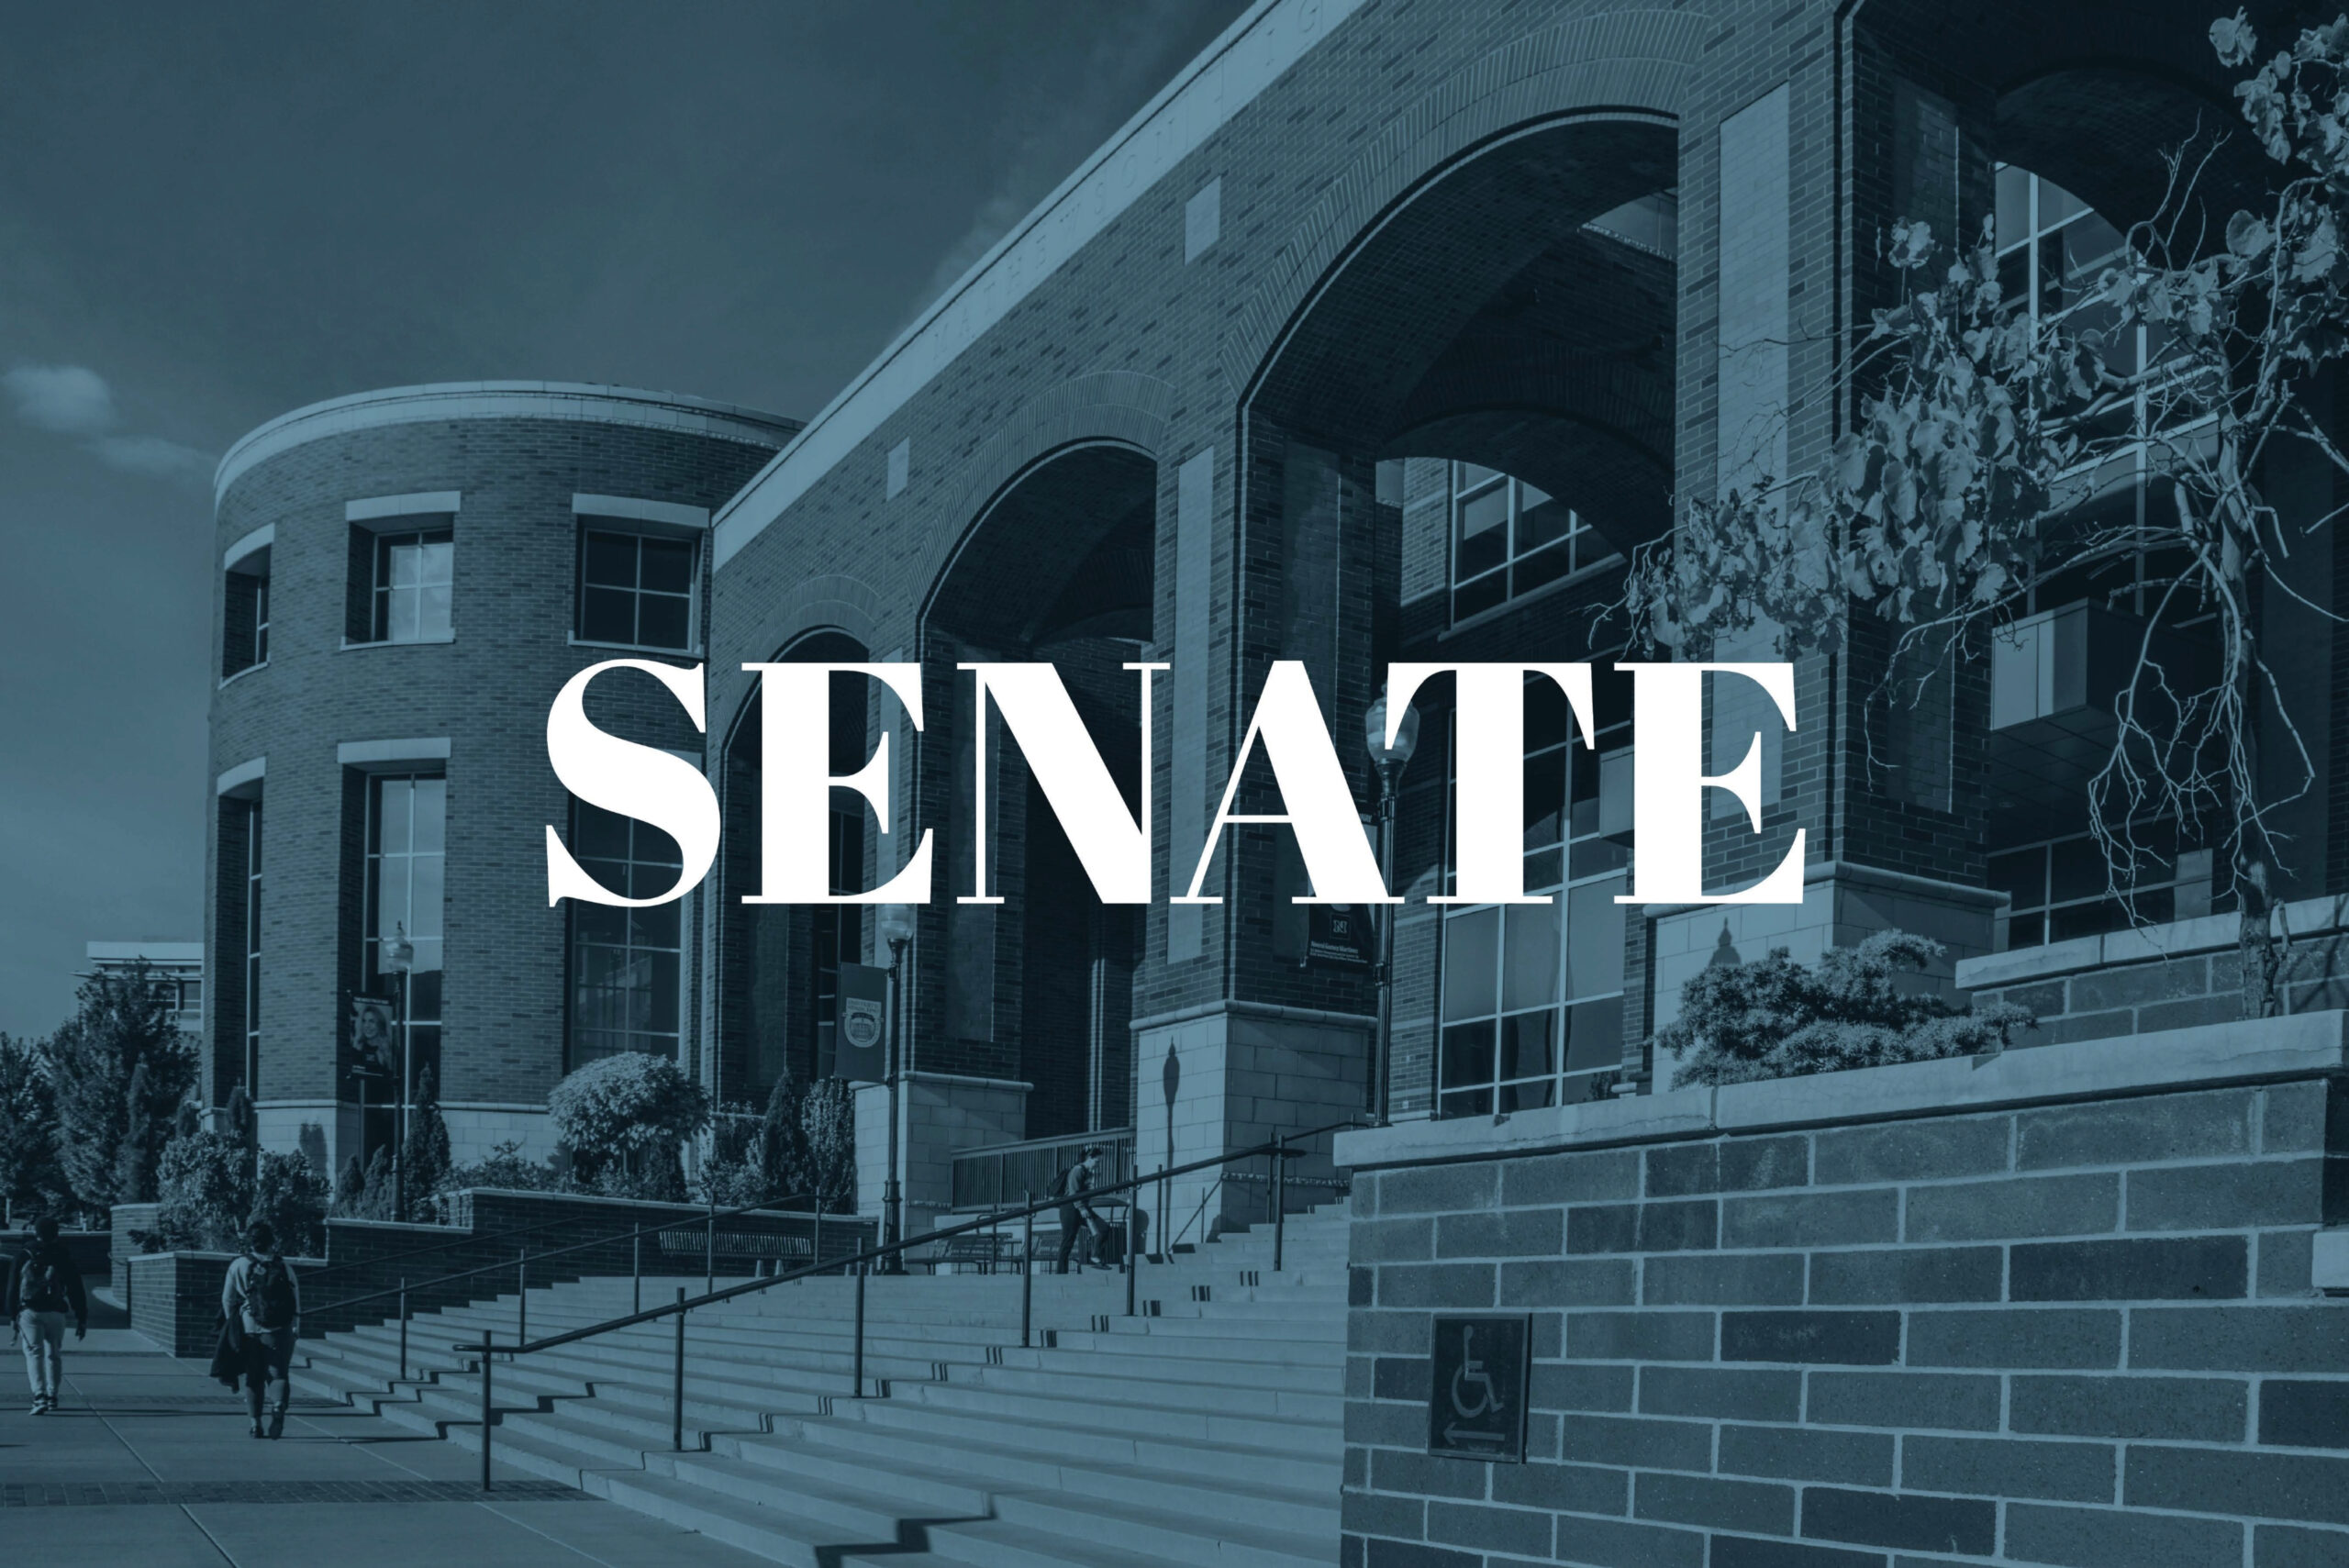 SENATE 1/24: Fentanyl testing strips, Election Day resolutions passed, resignations, hirings